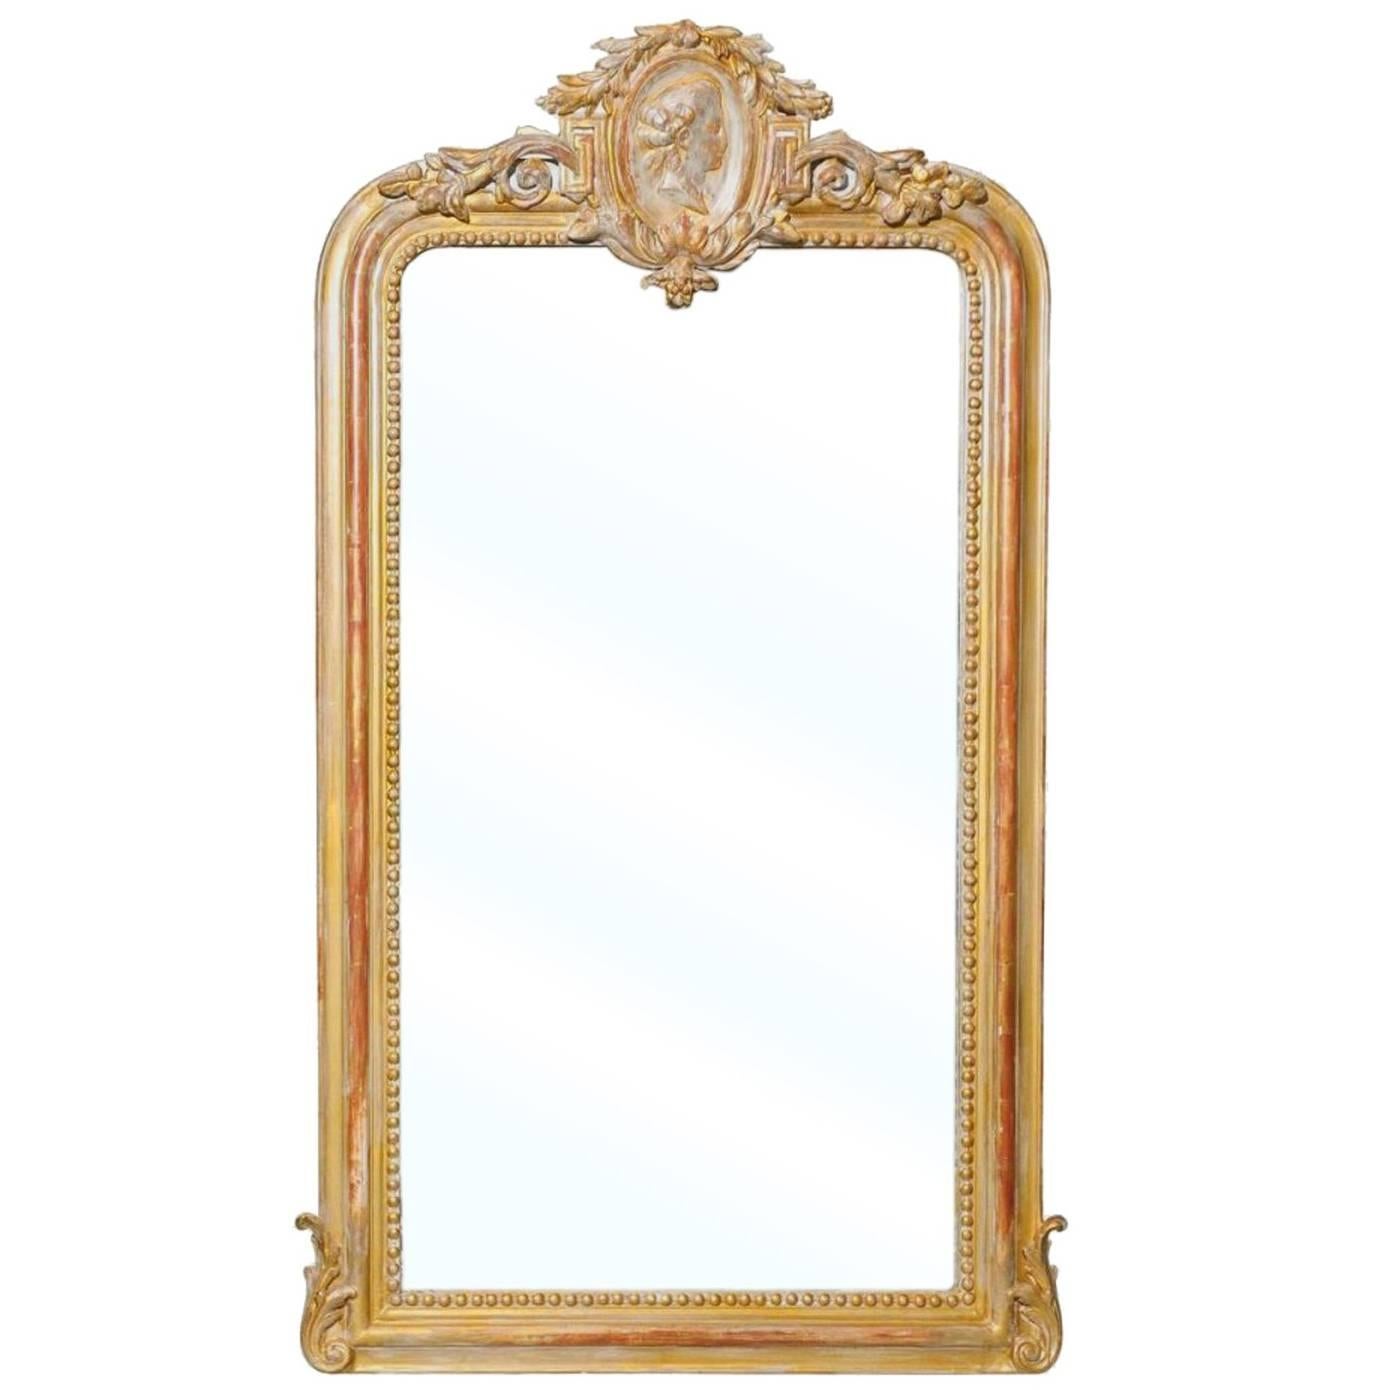 Gold and Silver Gilt French Neoclassical Style Mirror with Greek Profile Cameo